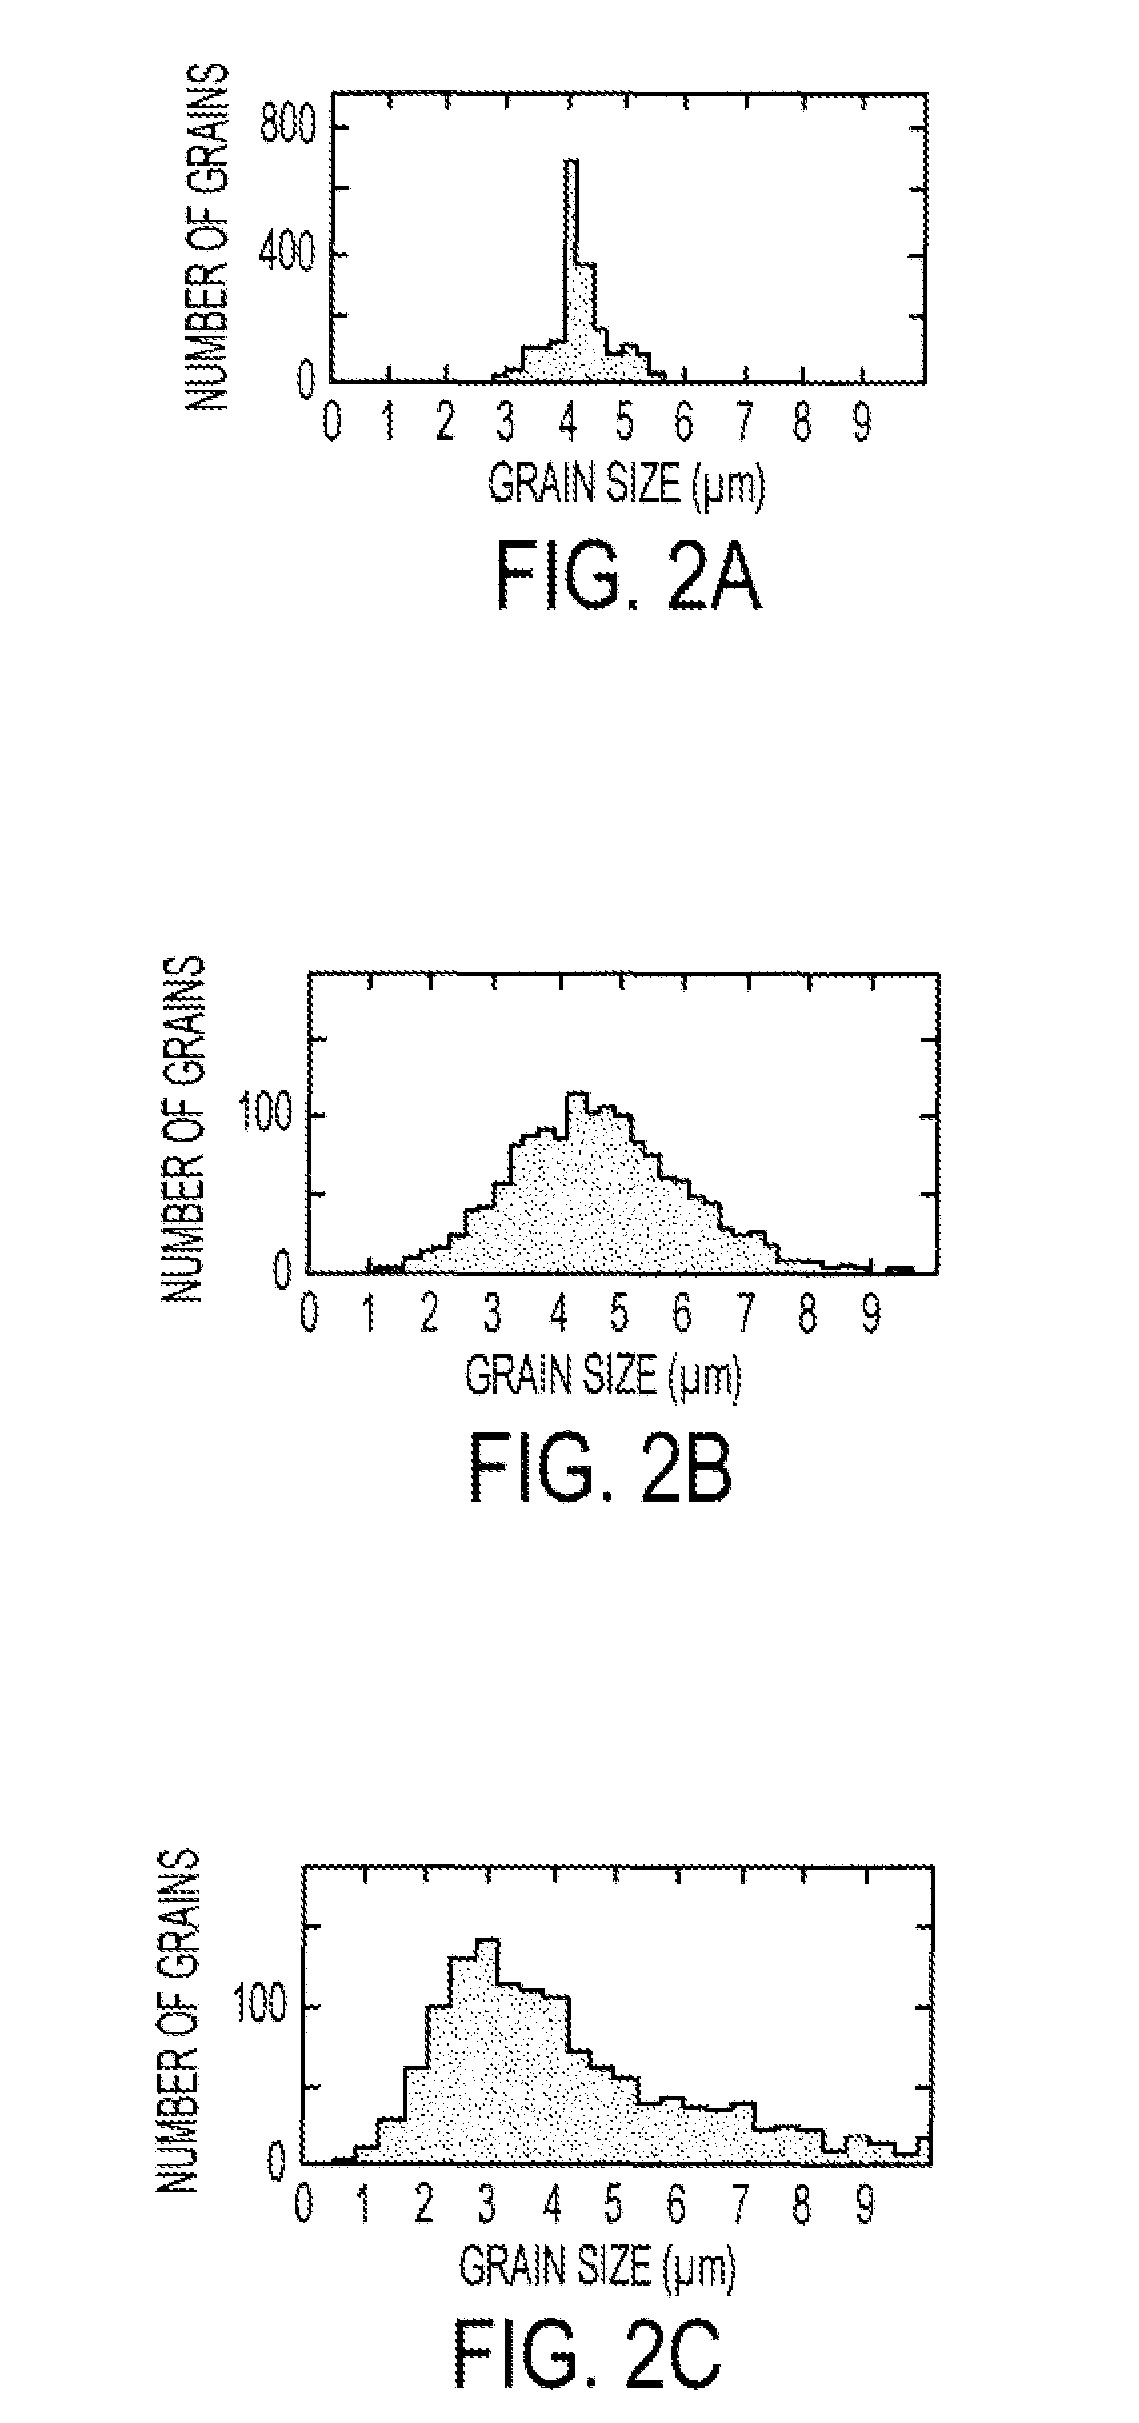 High optical transparent two-dimensional electronic conducting system and process for generating same